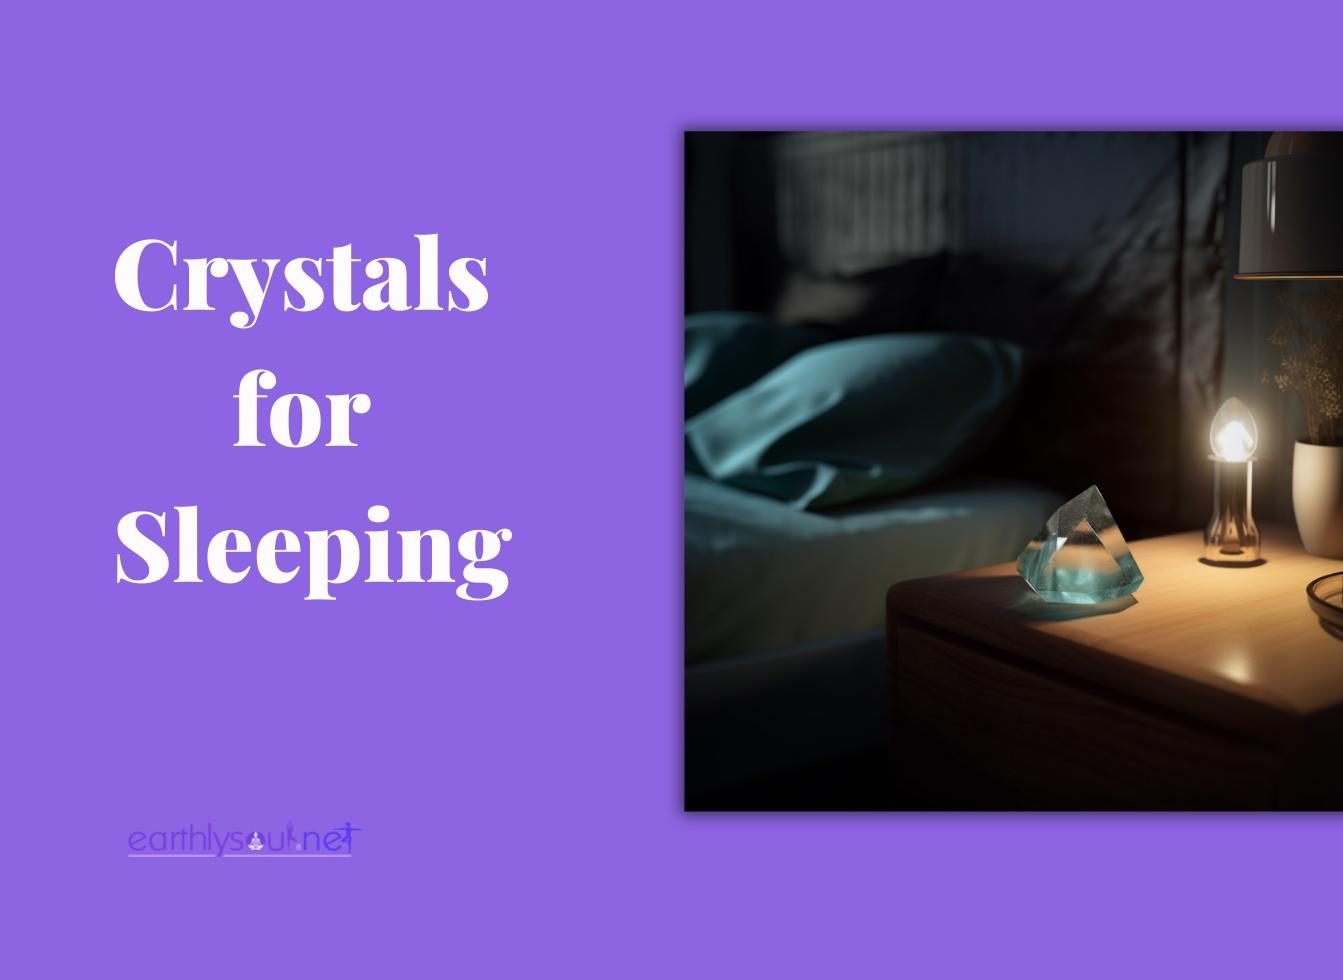 Crystals for sleeping featured image including dimly lit bedroom with crystal on bedside table